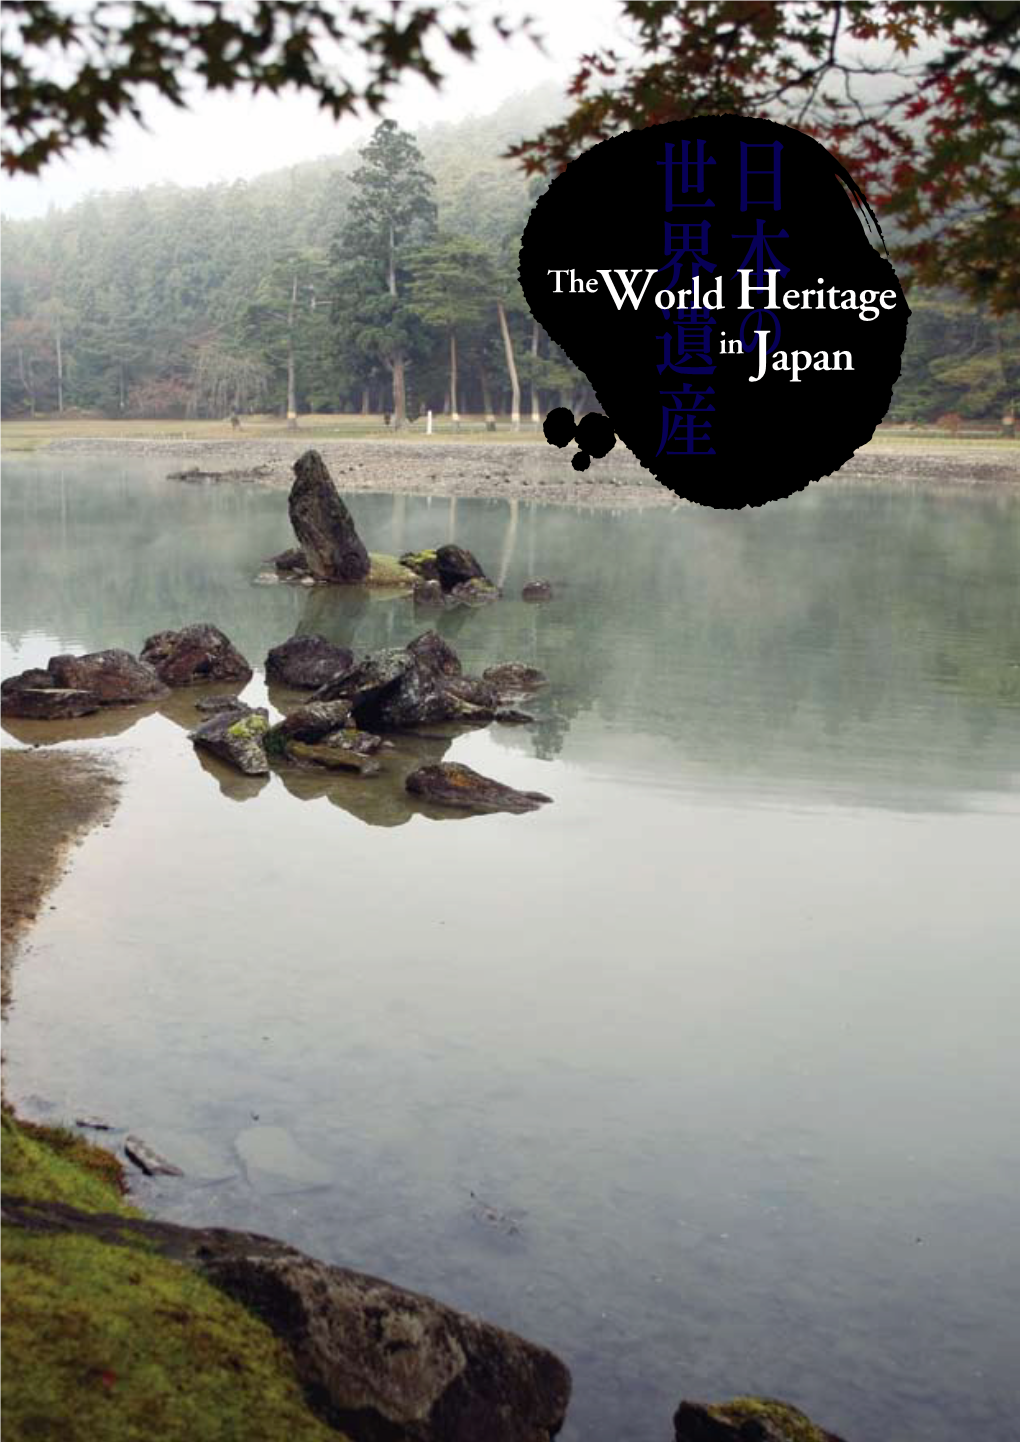 The World Heritage in Japan